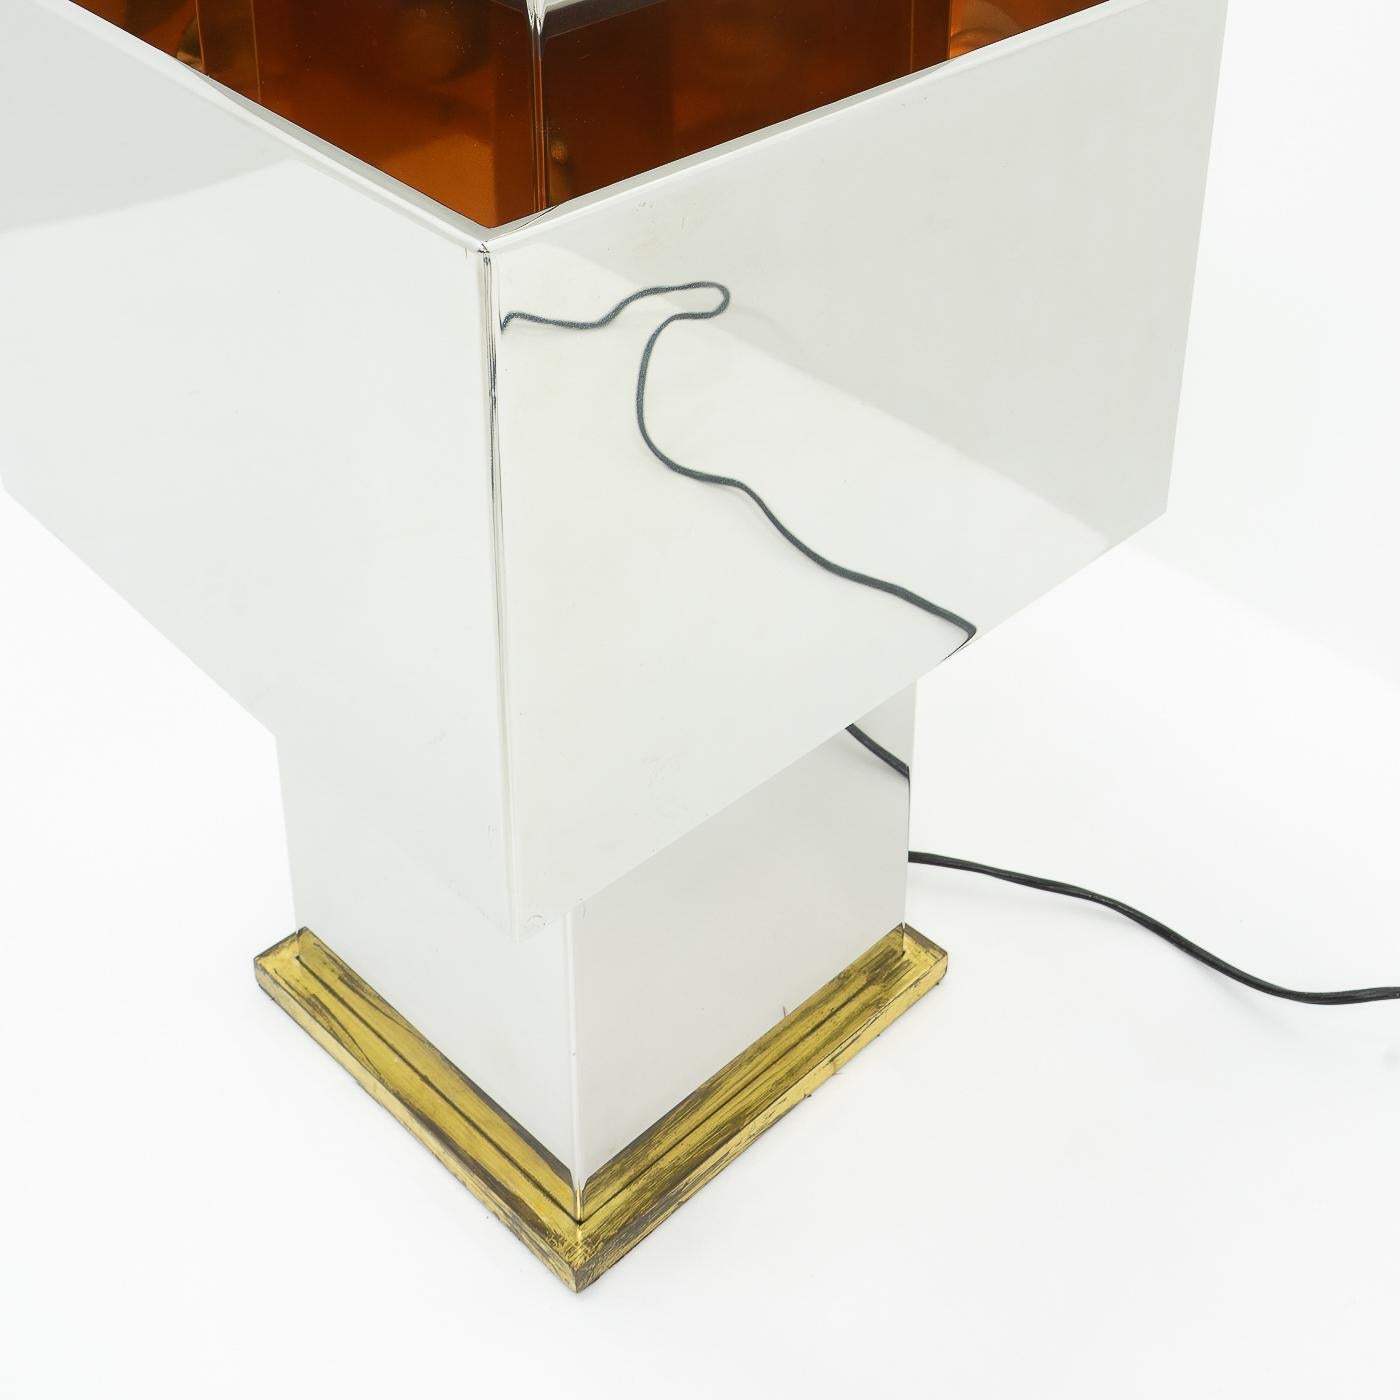 Willy Rizzo, Vintage “Love” Table Lamp, 1970s For Sale 1